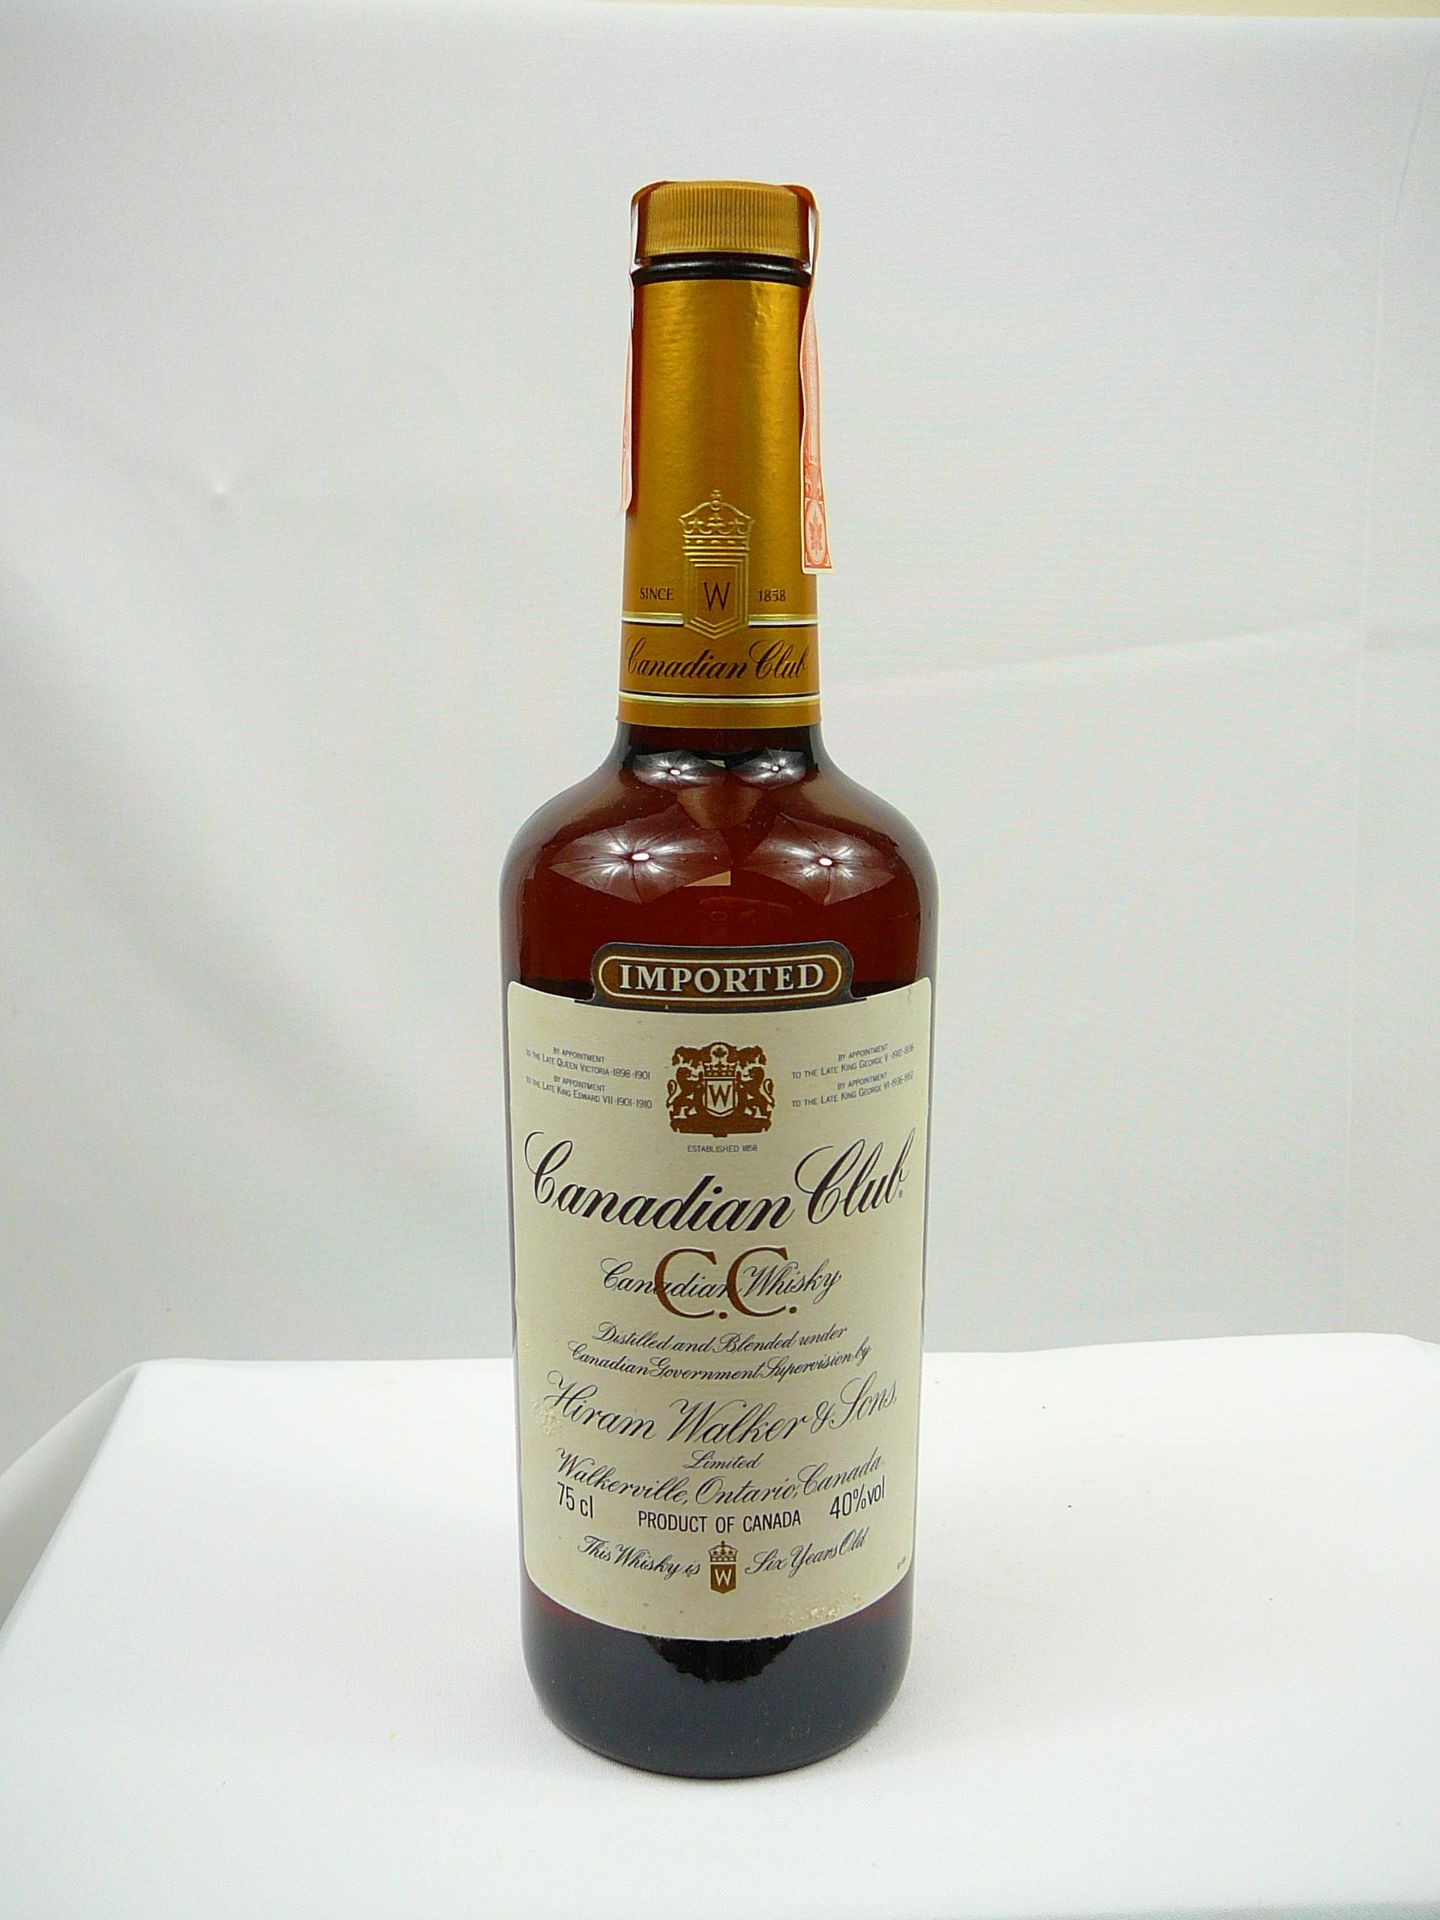 Vintage Canadian Club Whisky